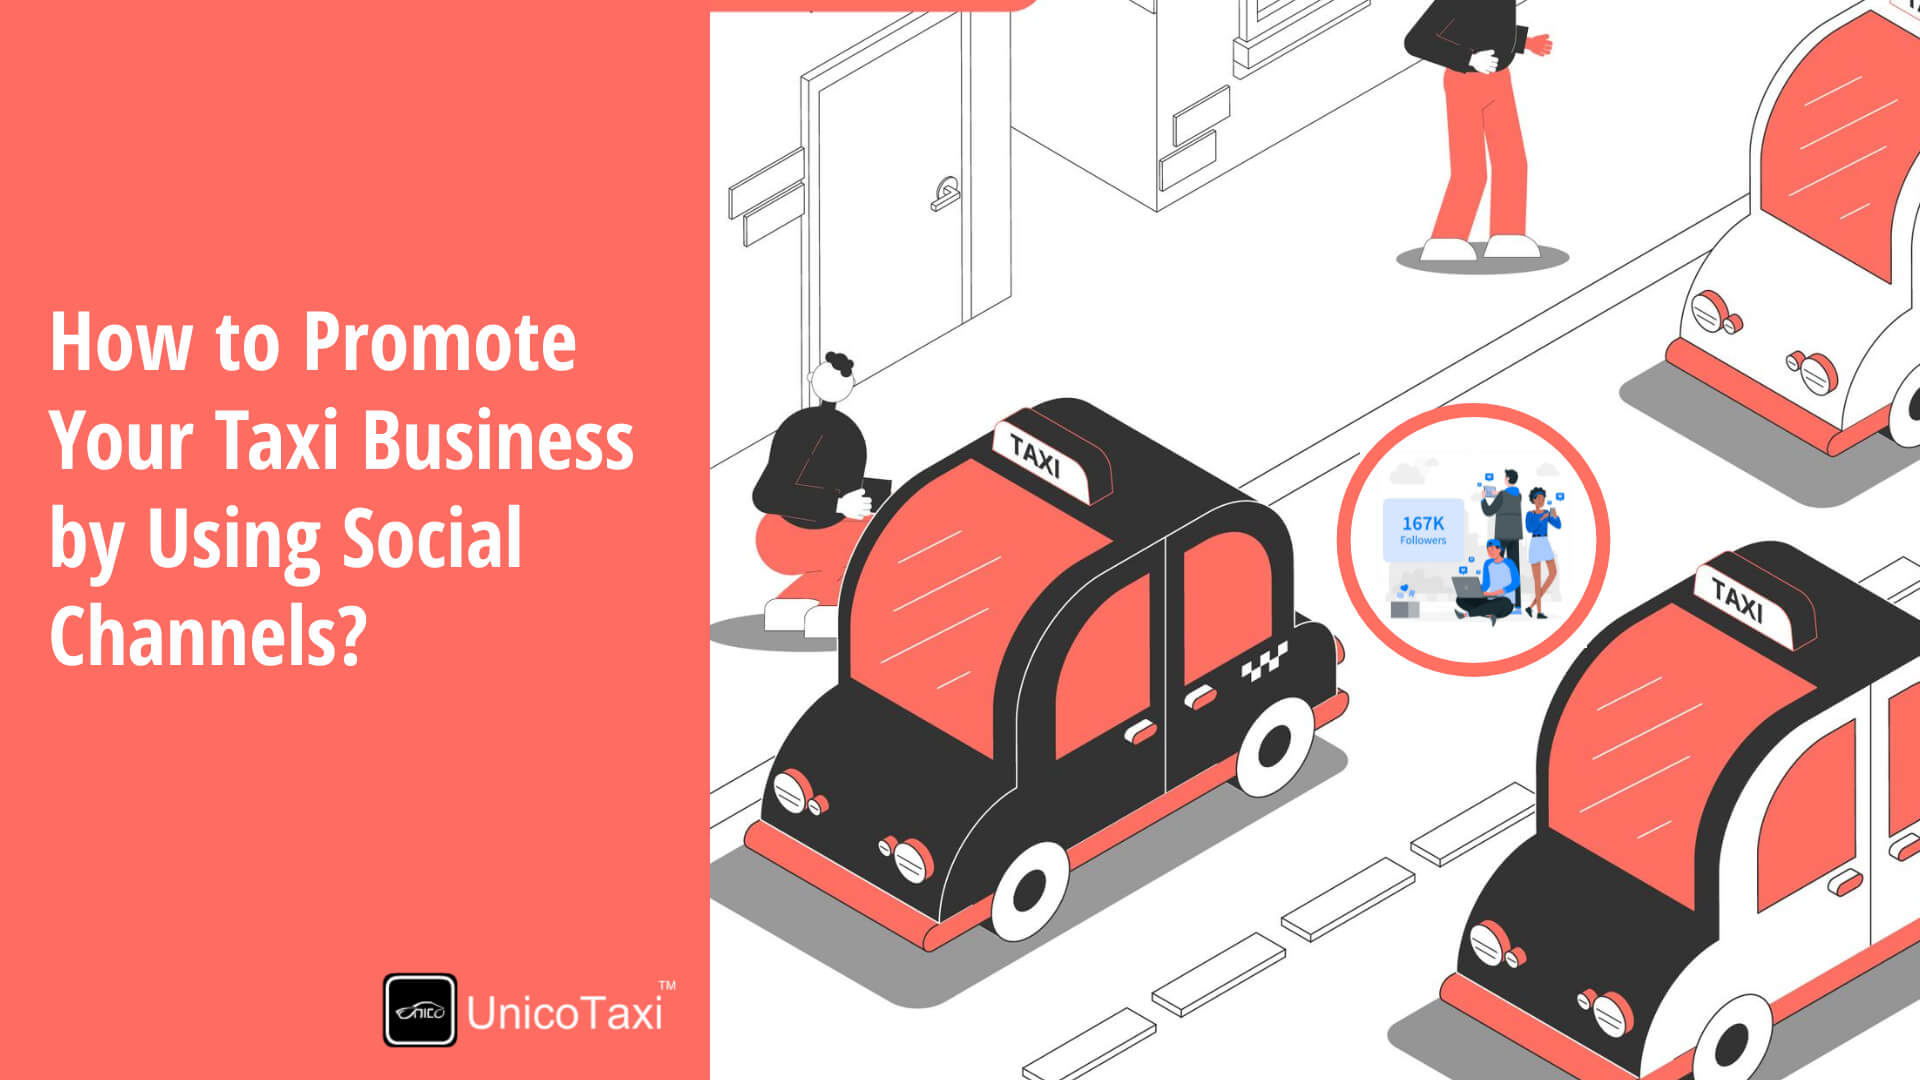 How to Promote Your Taxi Business by Using Social Channels?